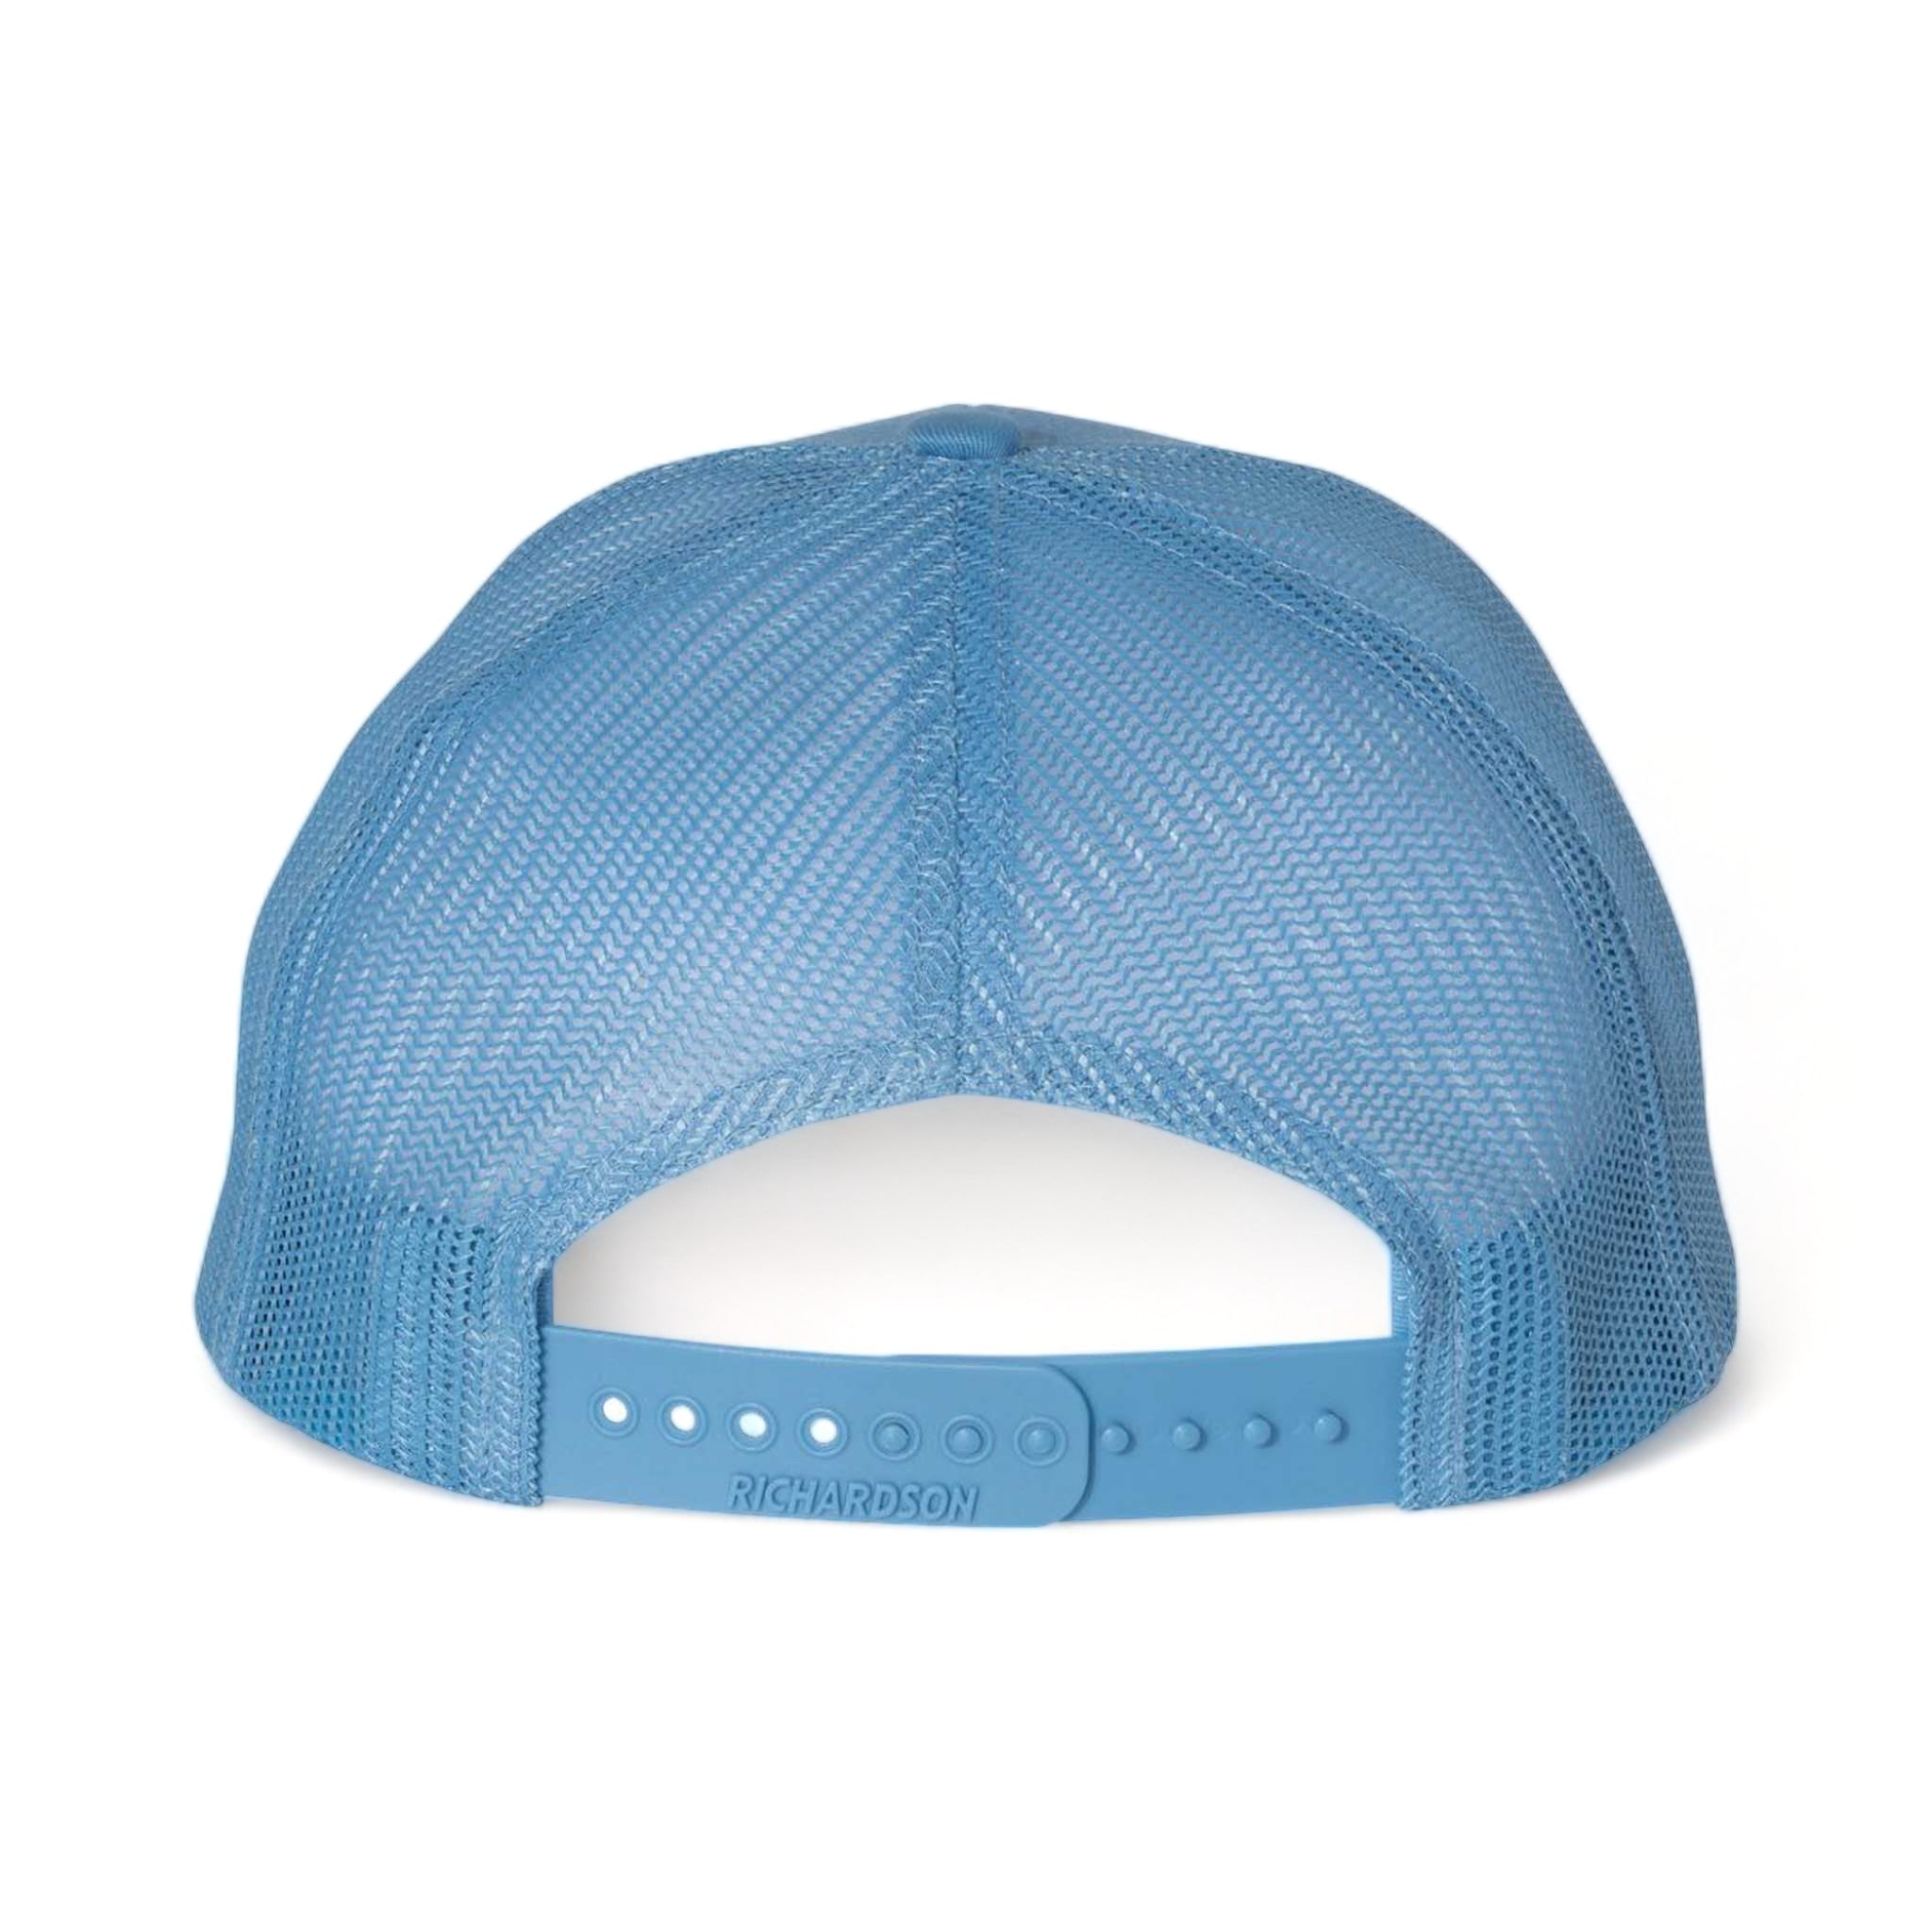 Back view of Richardson 112 custom hat in columbia blue